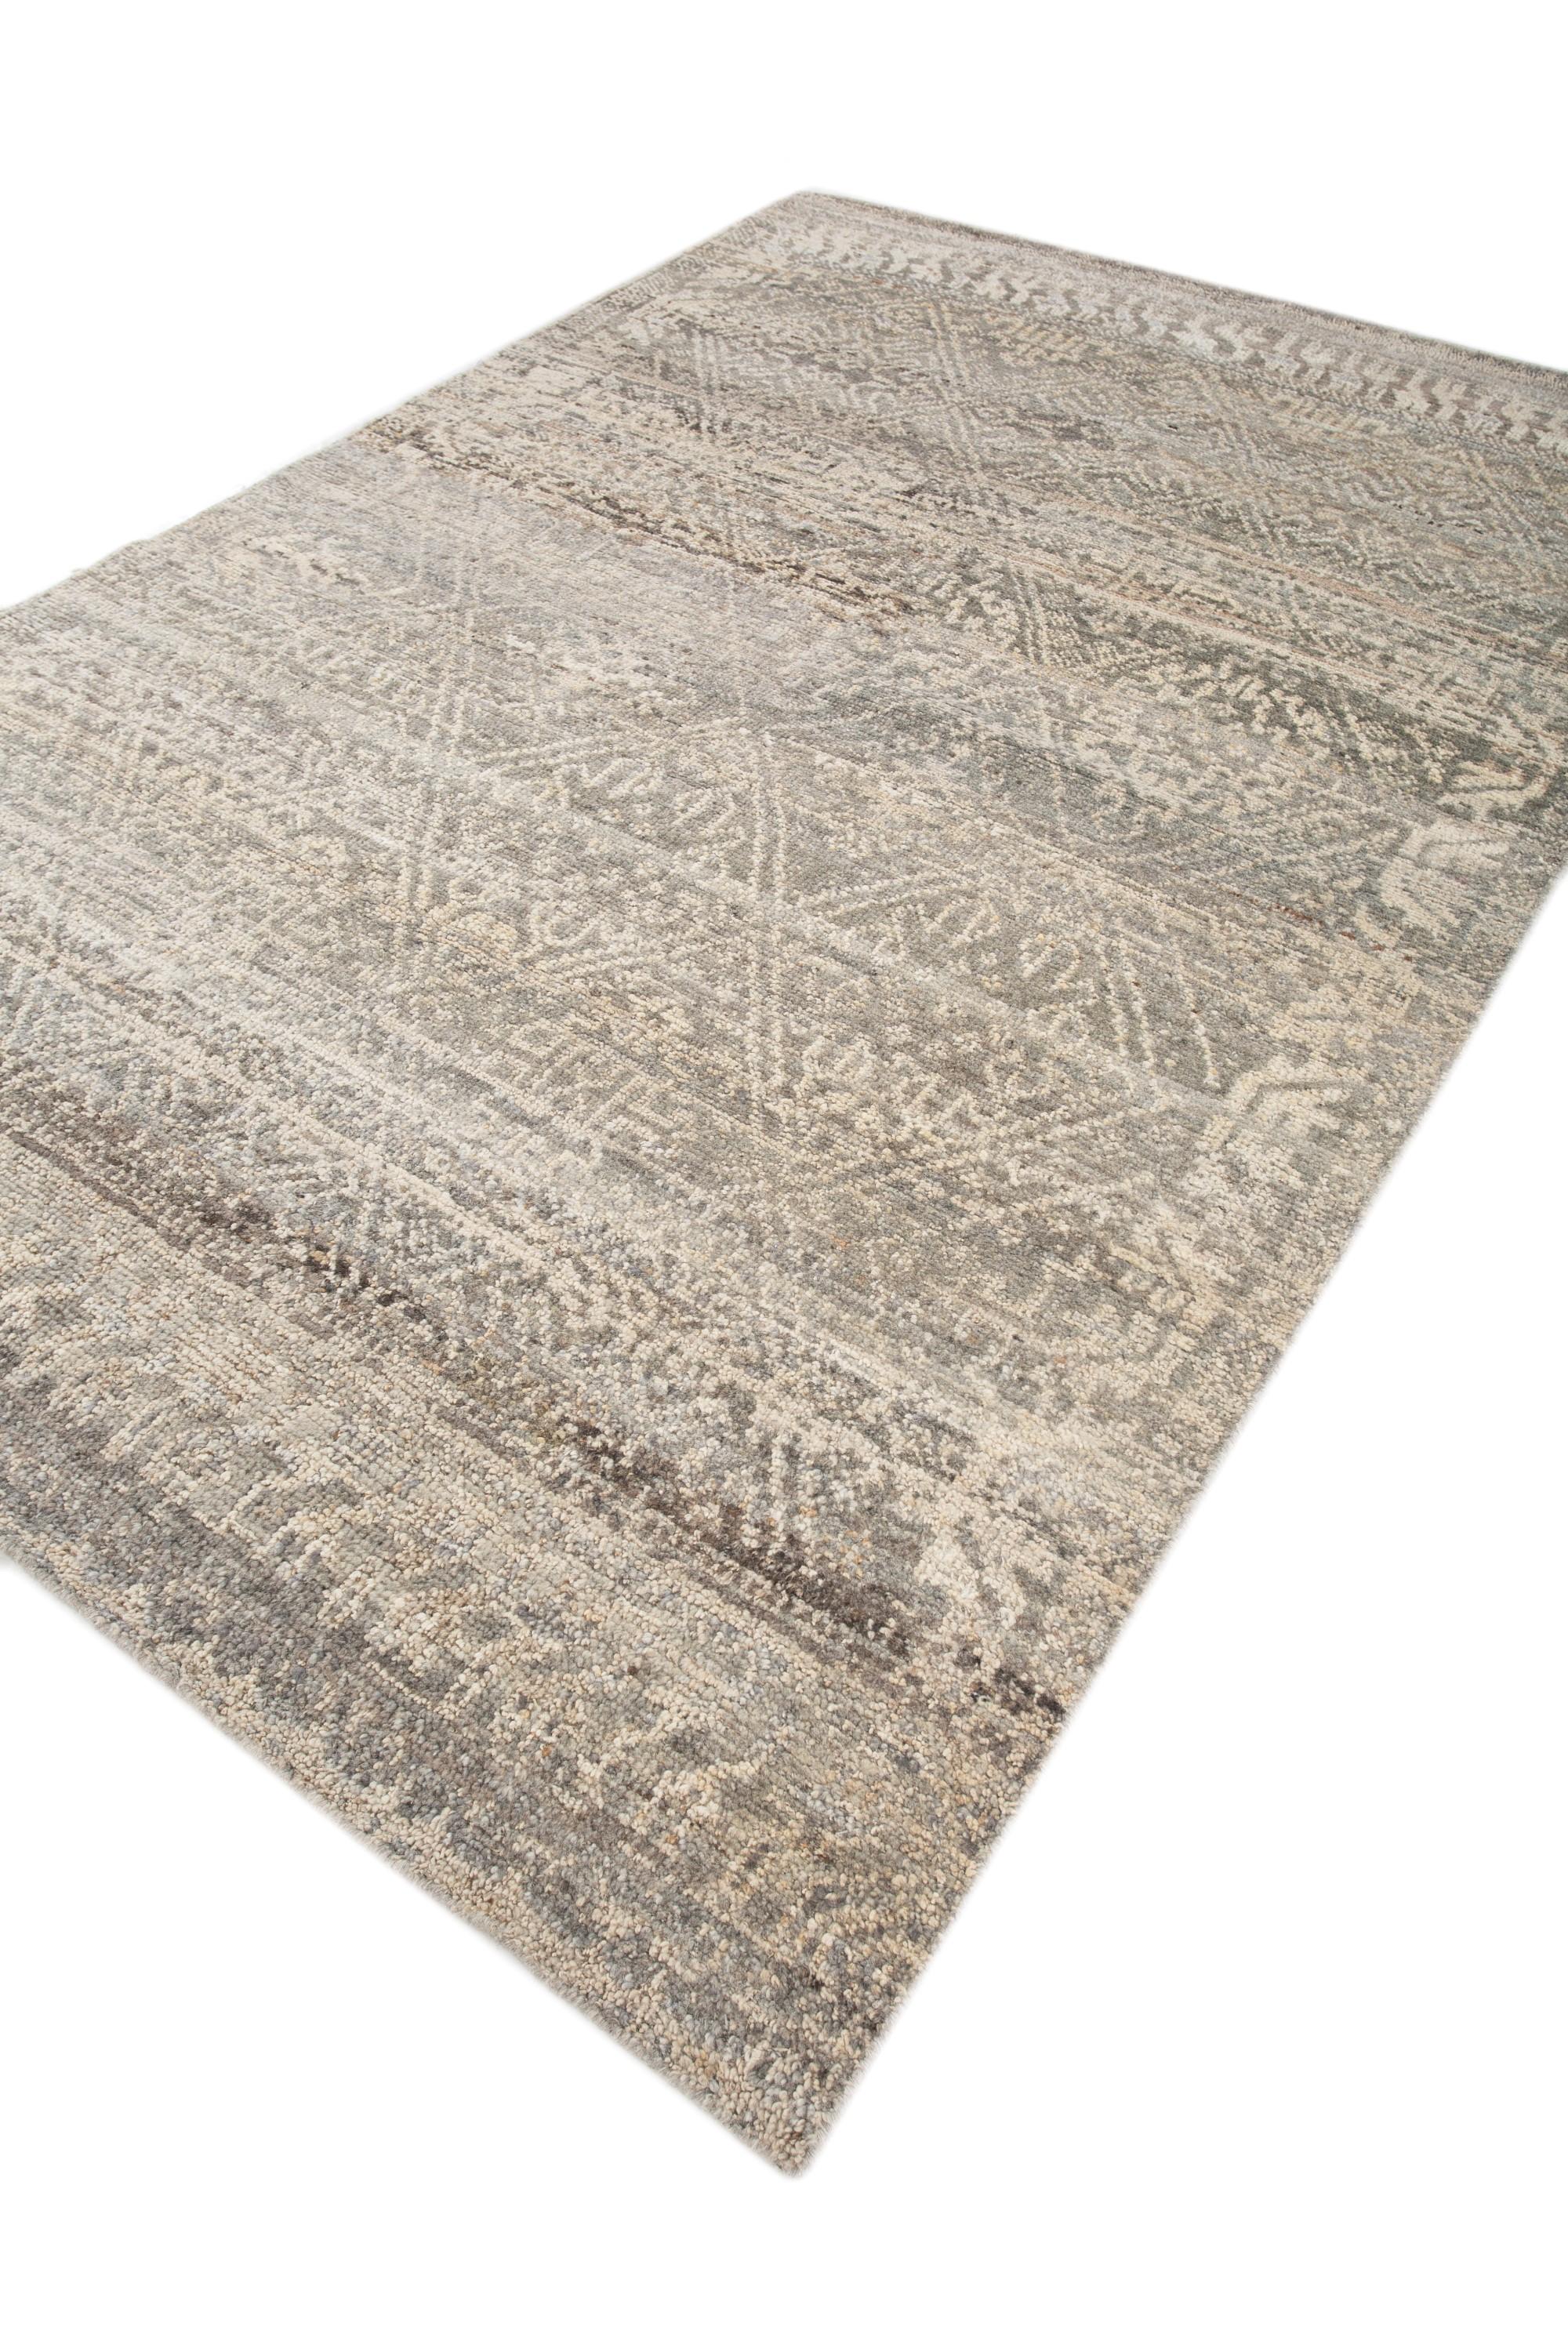 Country Serene Landscape Whispers Natural Gray 180X270 cm Hand-Knotted Rug For Sale